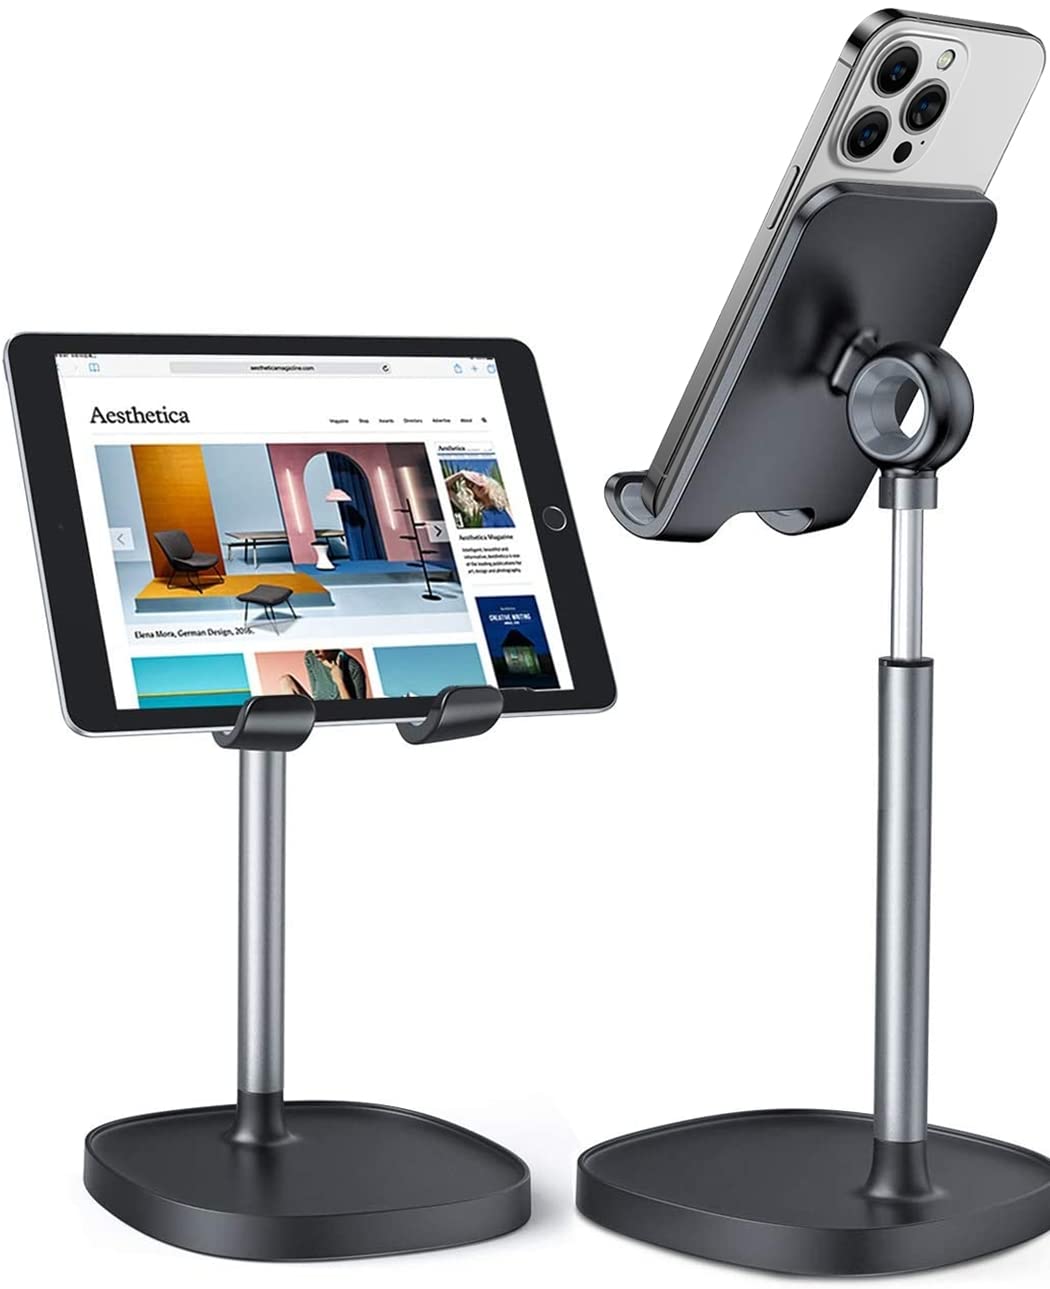 LISEN Adjustable Cell Phone Stand $6 + Free Shipping w/ Prime or orders $25+